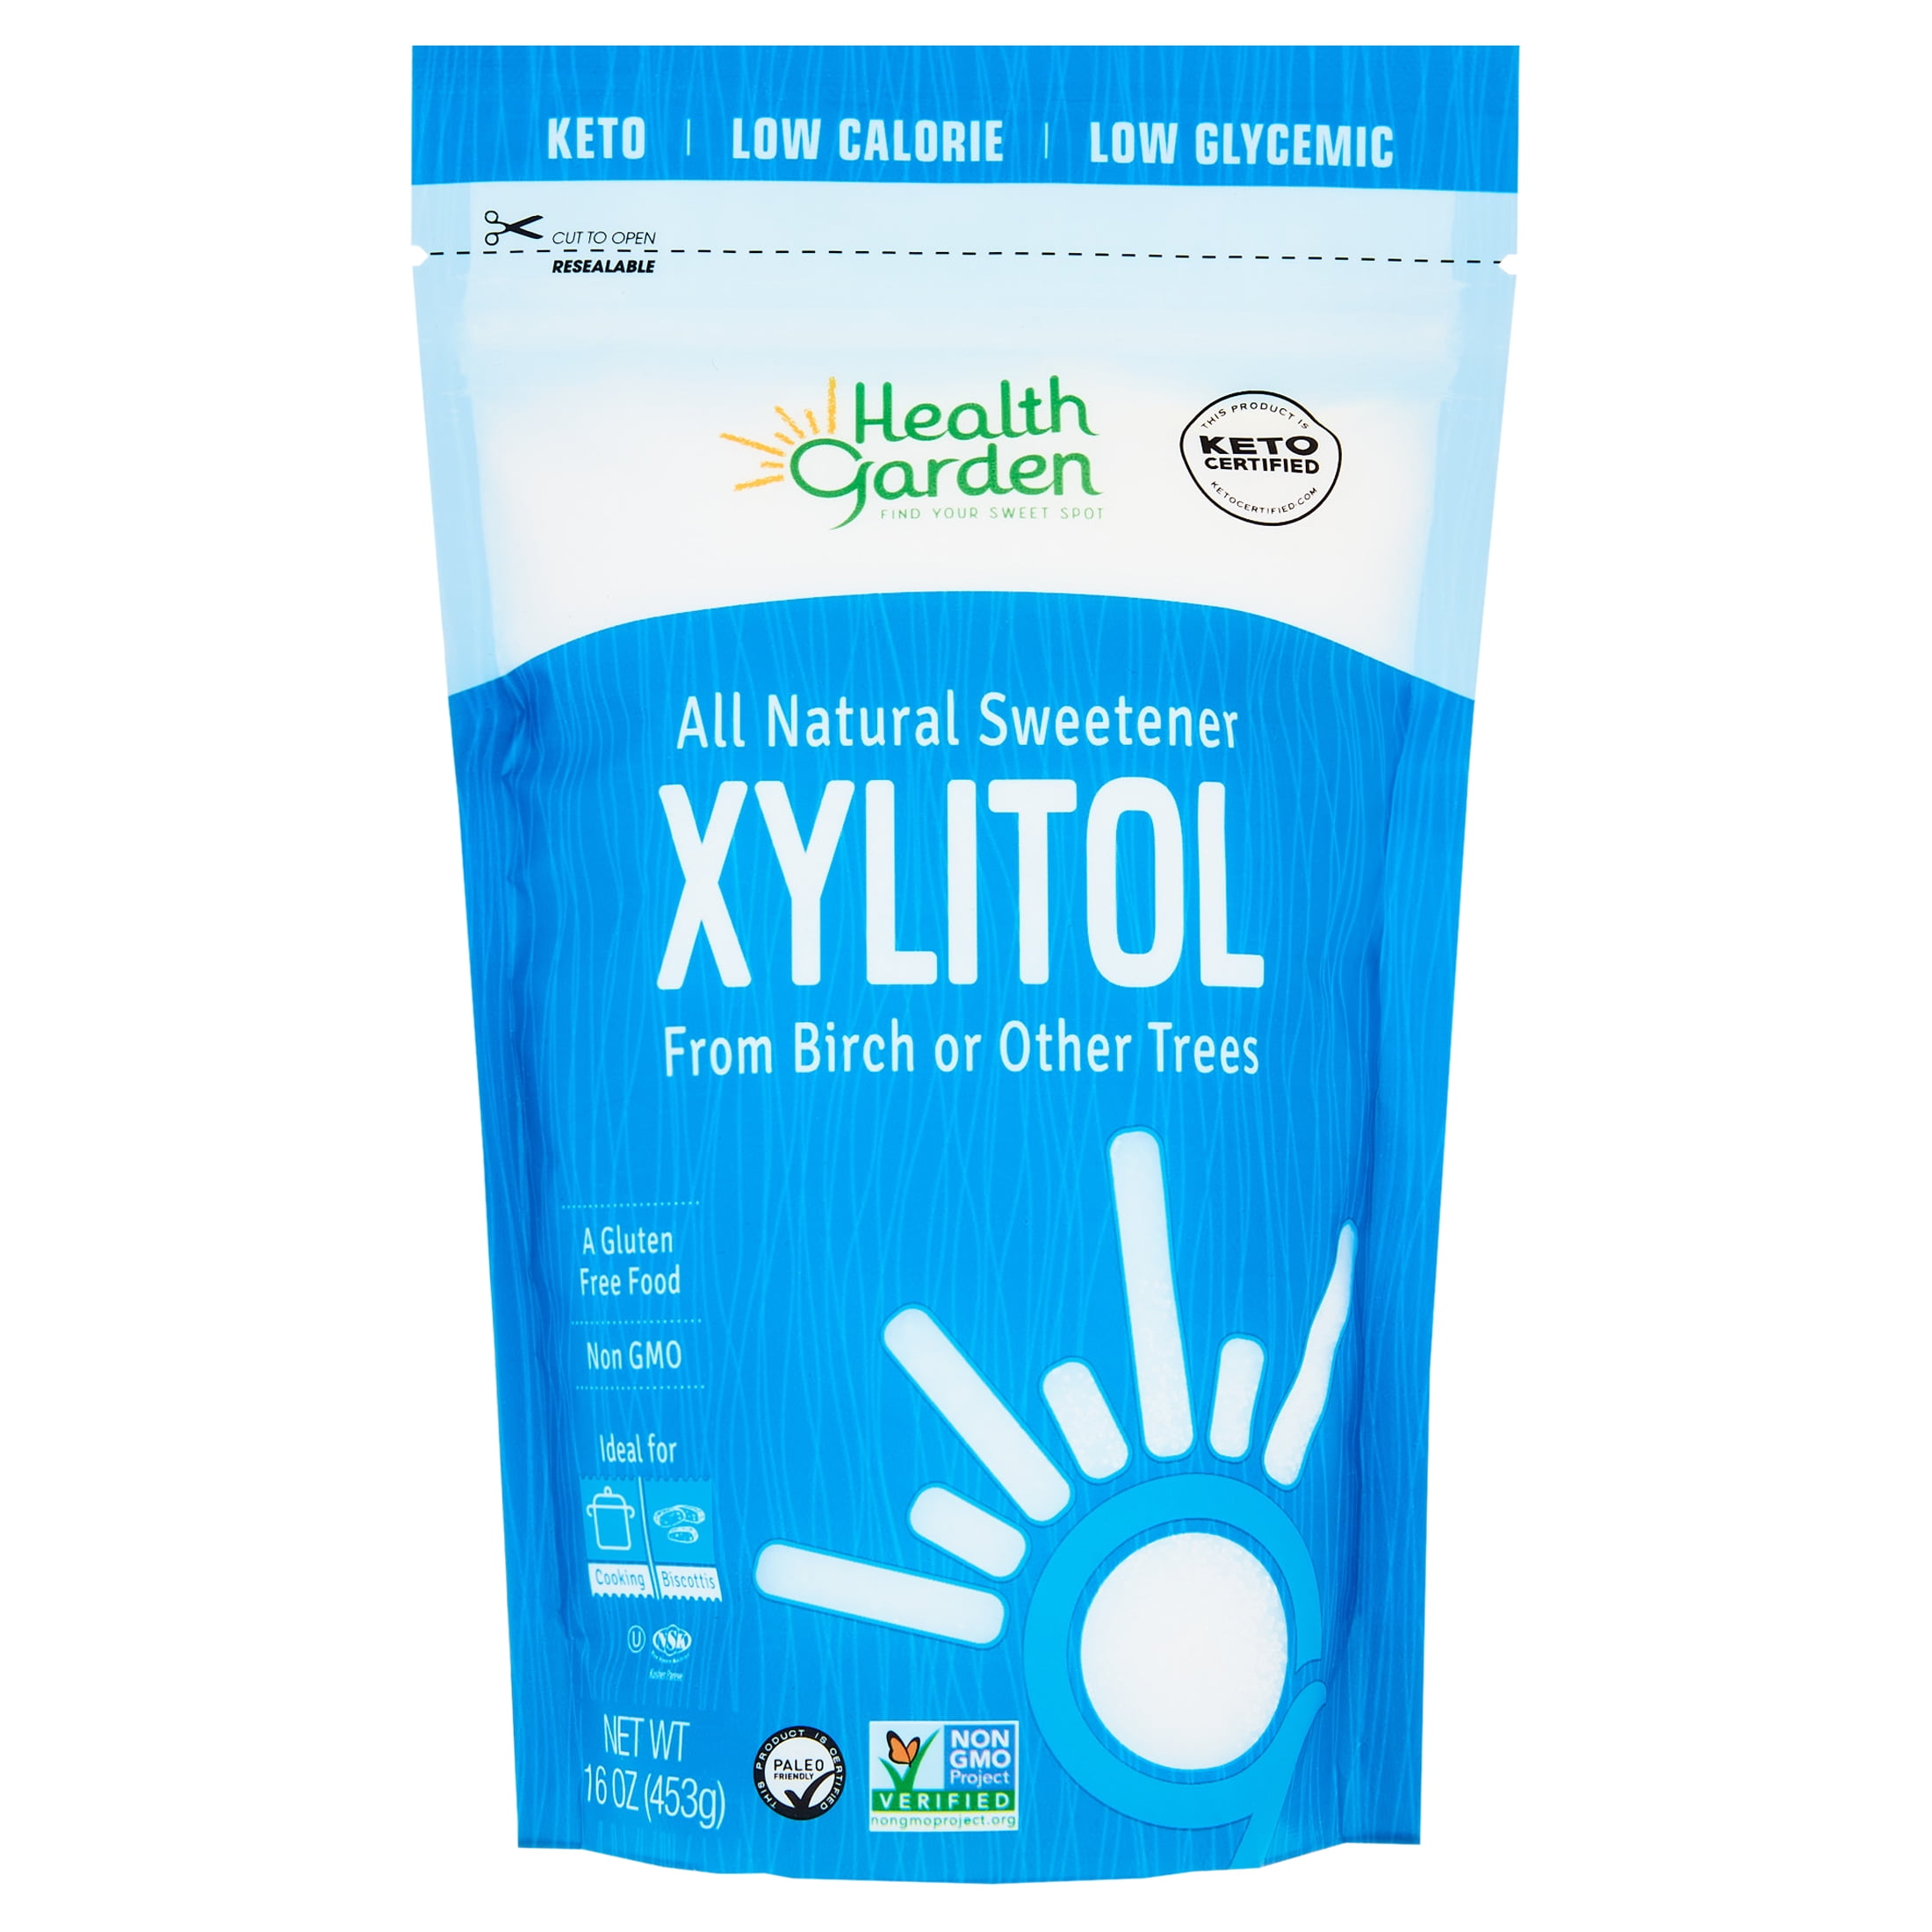 DureLife XYLITOL Sugar Substitute Made From 100% Pure Birch Xylitol NO